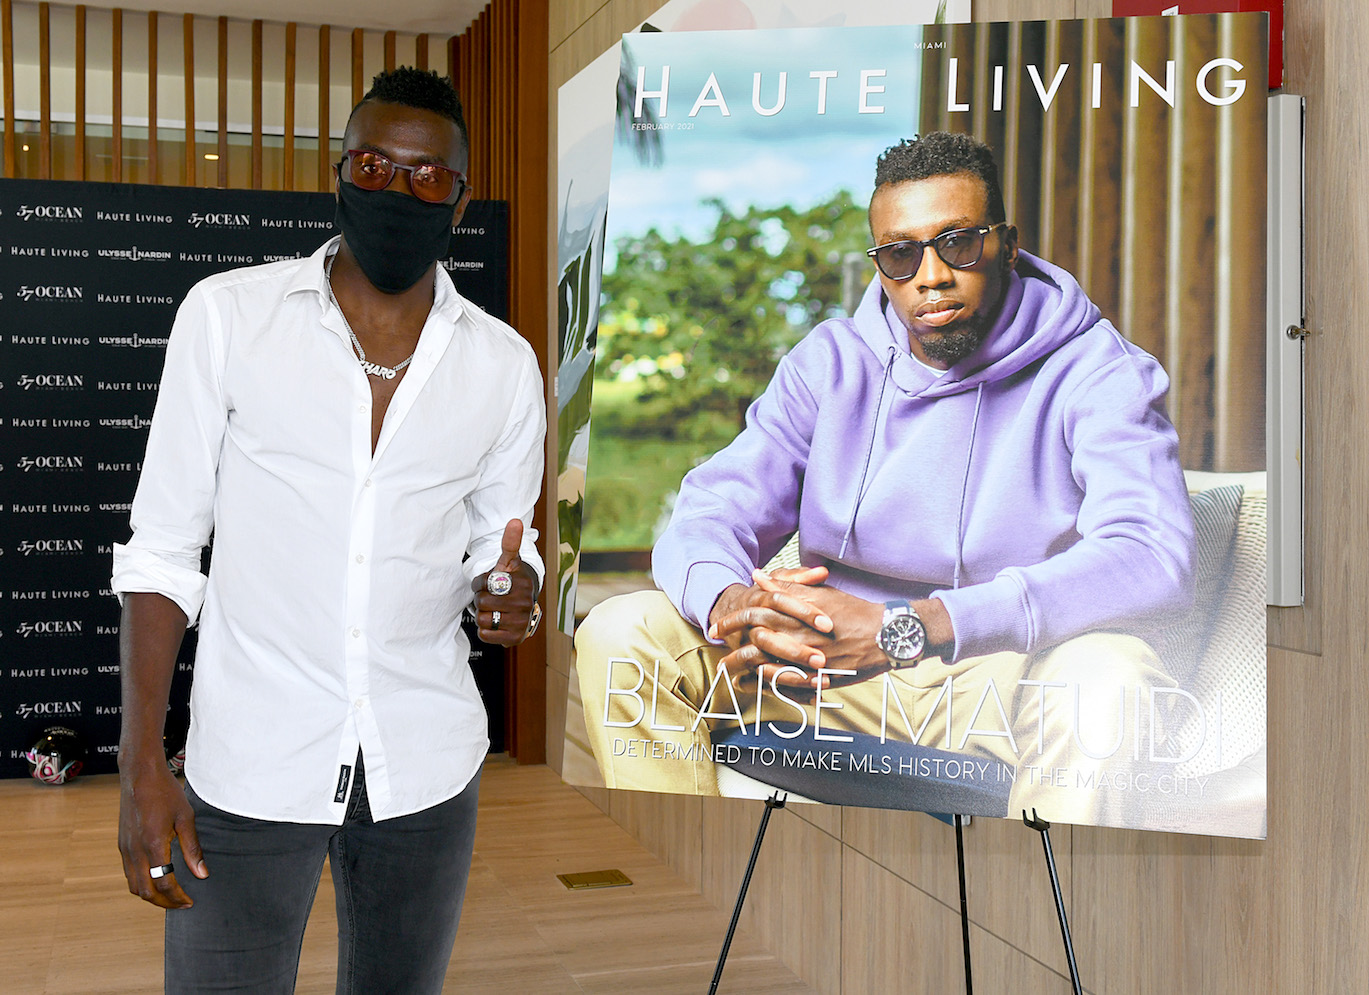 World Cup Champion Blaise Matuidi Receives The Surprise Of His Life At Haute Living Cover Celebration